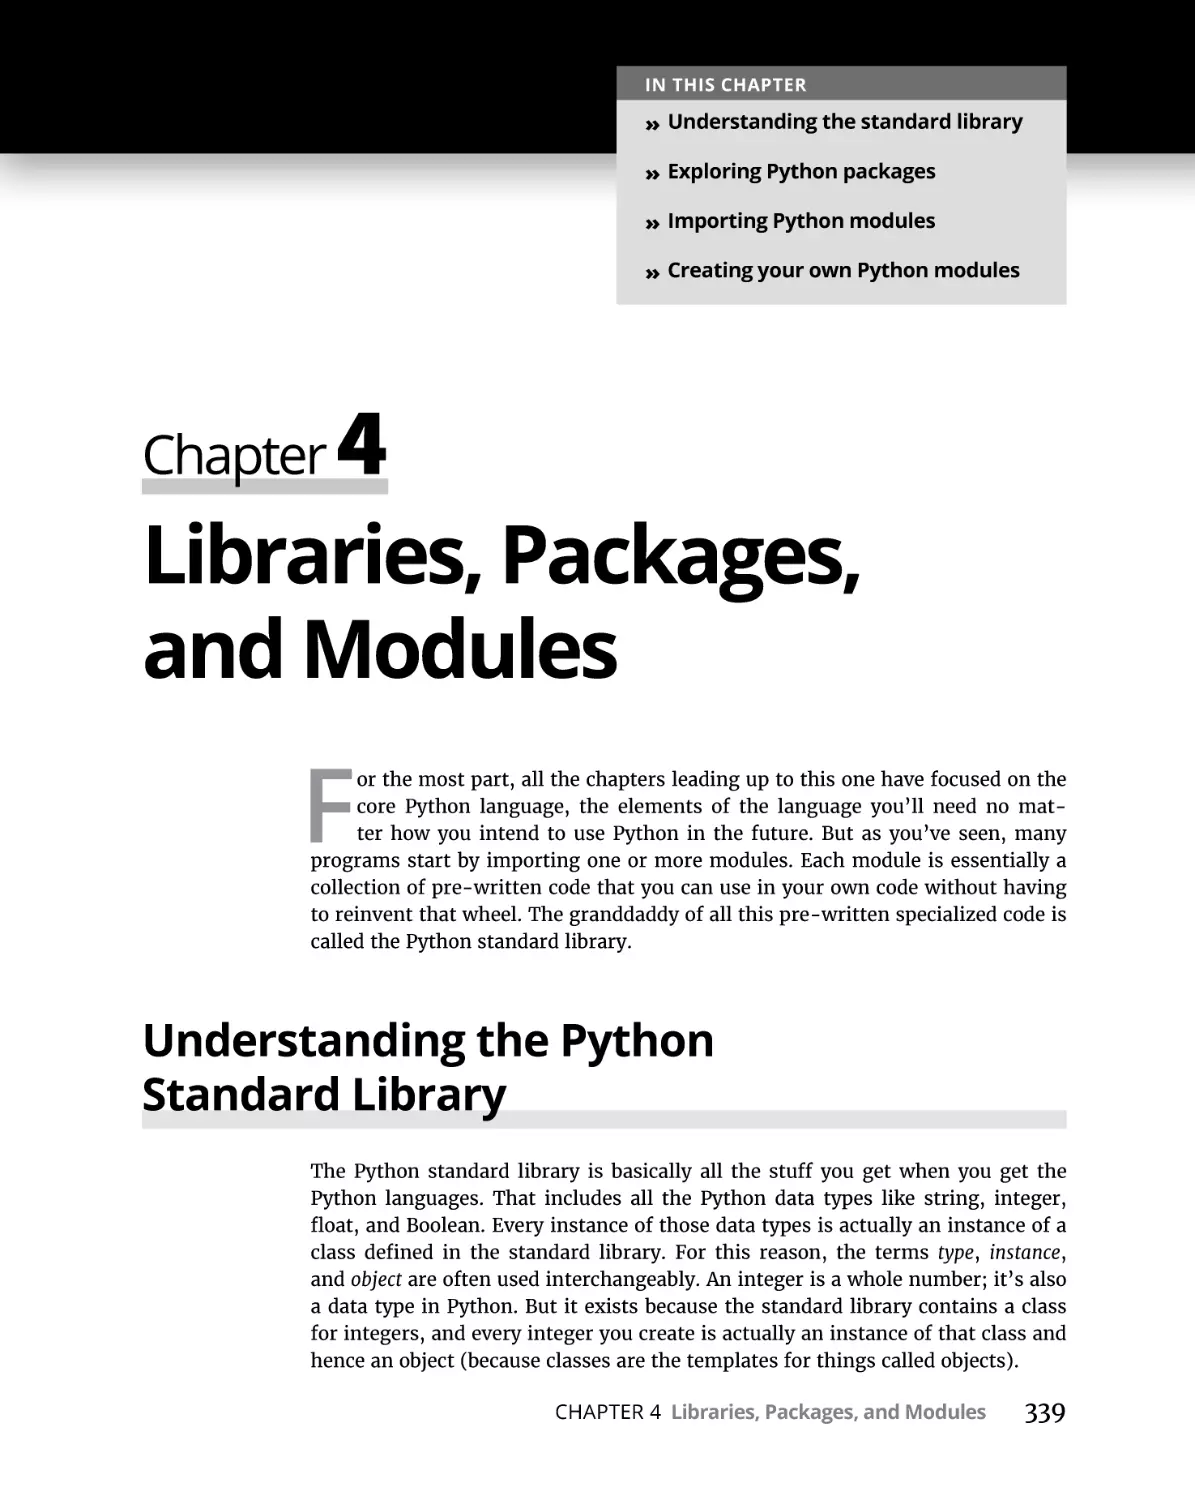 Chapter 4 Libraries, Packages, and Modules
Understanding the Python Standard Library